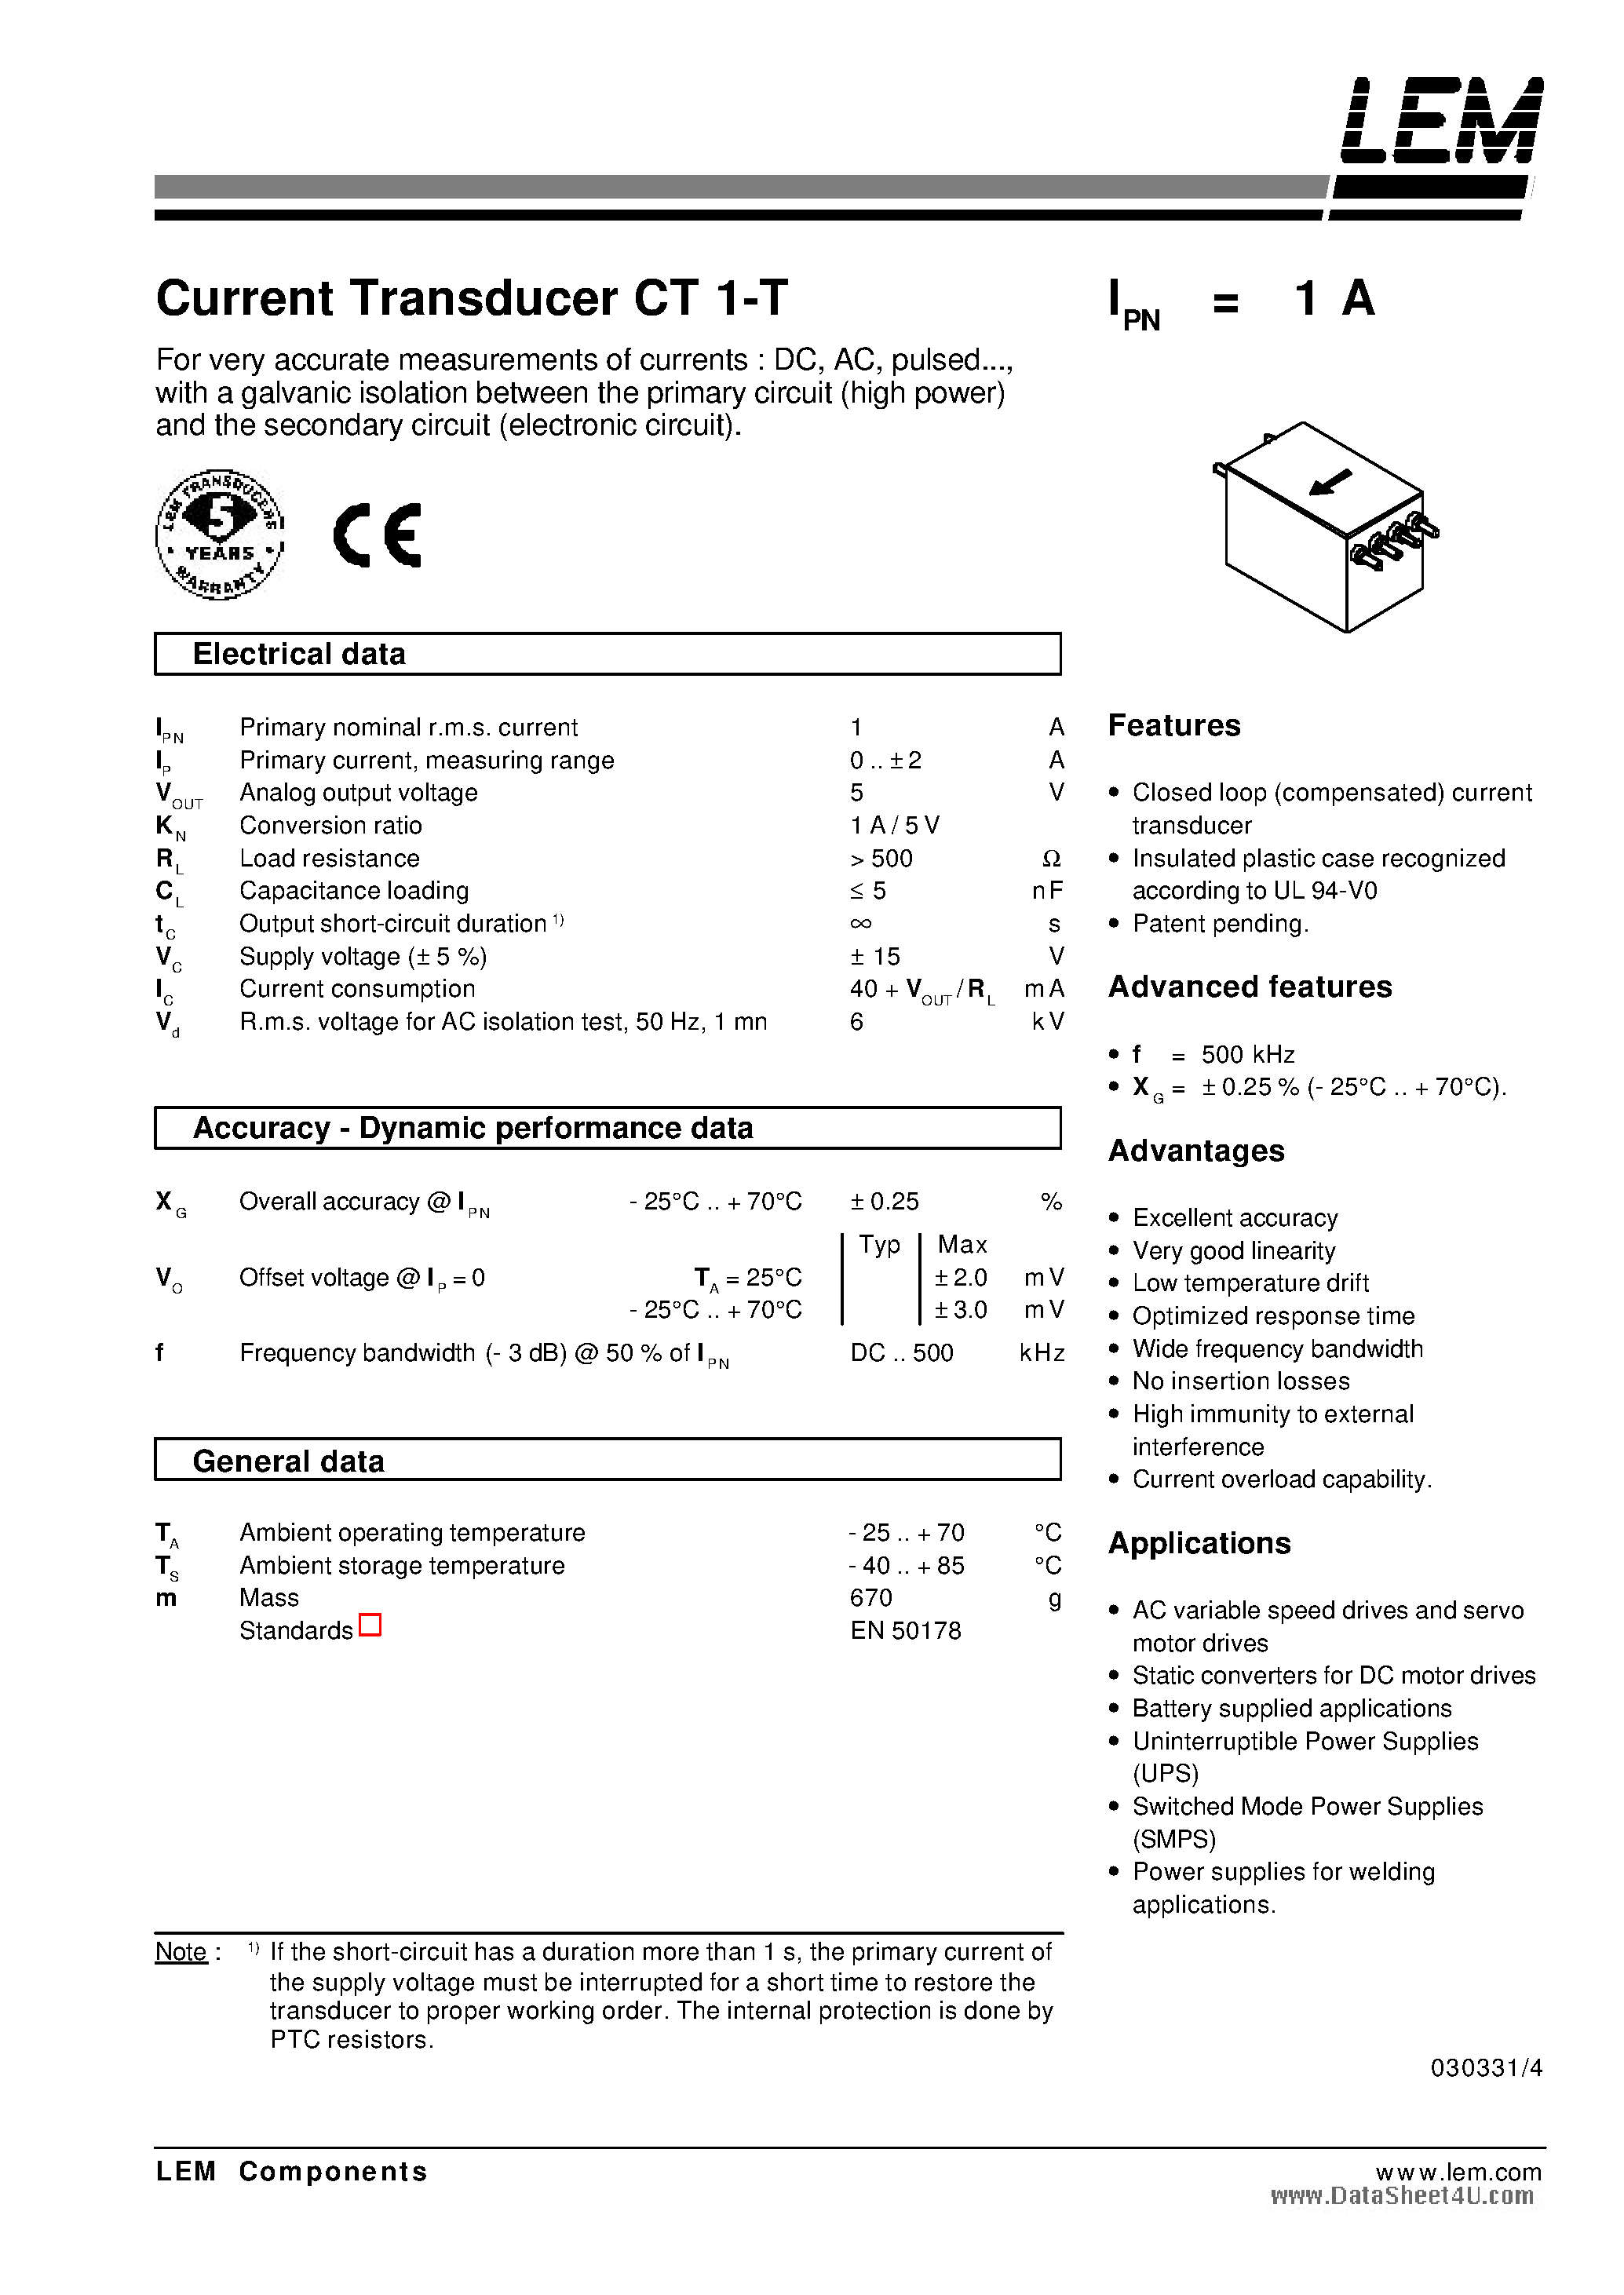 Datasheet CT1-T - Current Transducer page 1